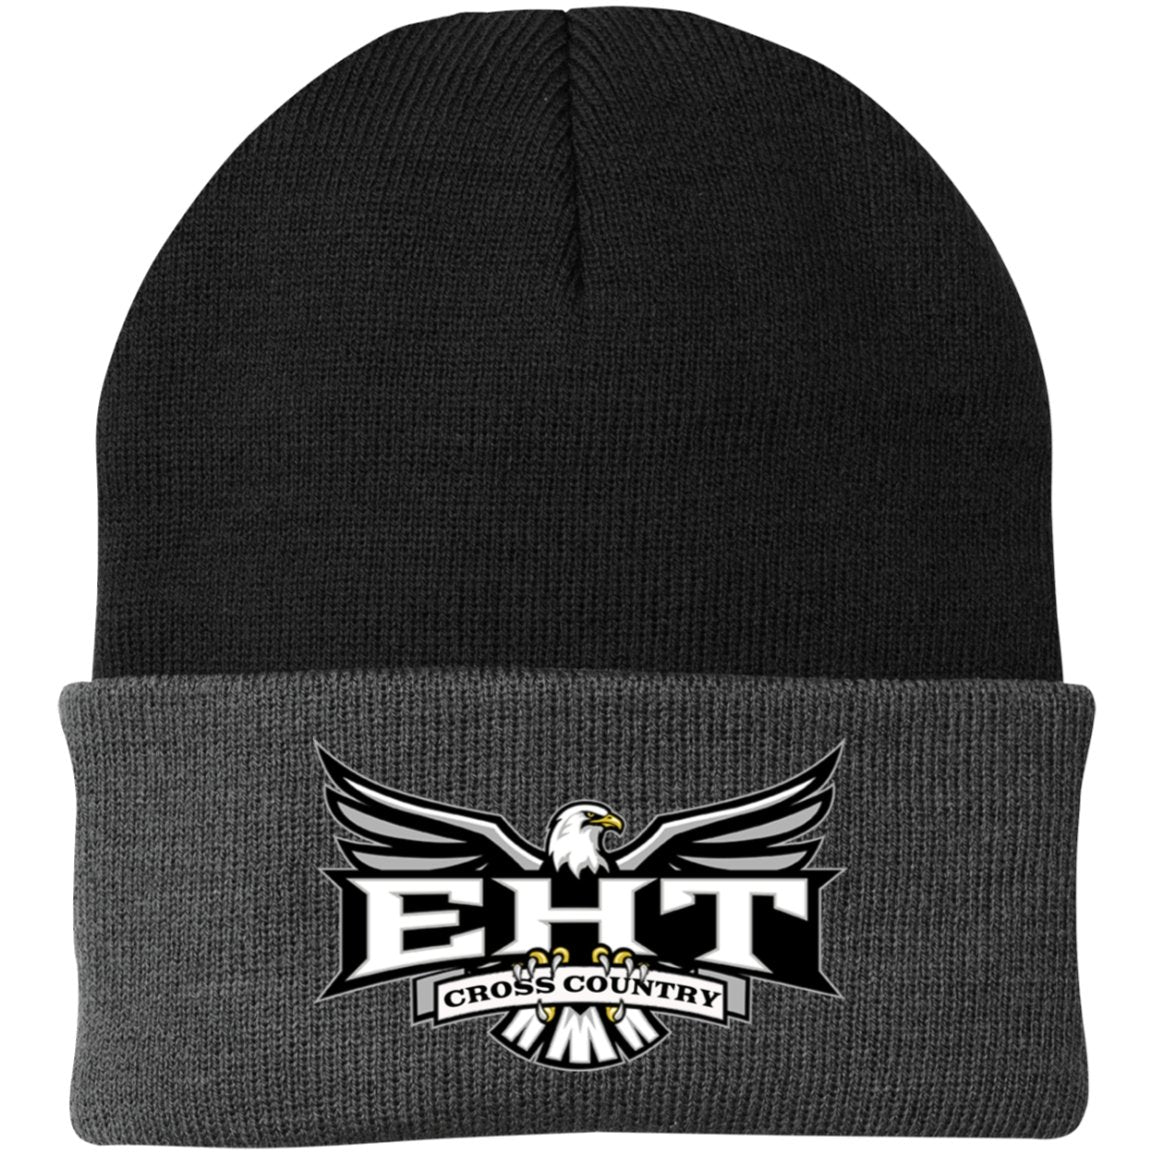 EHTXC Embroidered Knit Cap